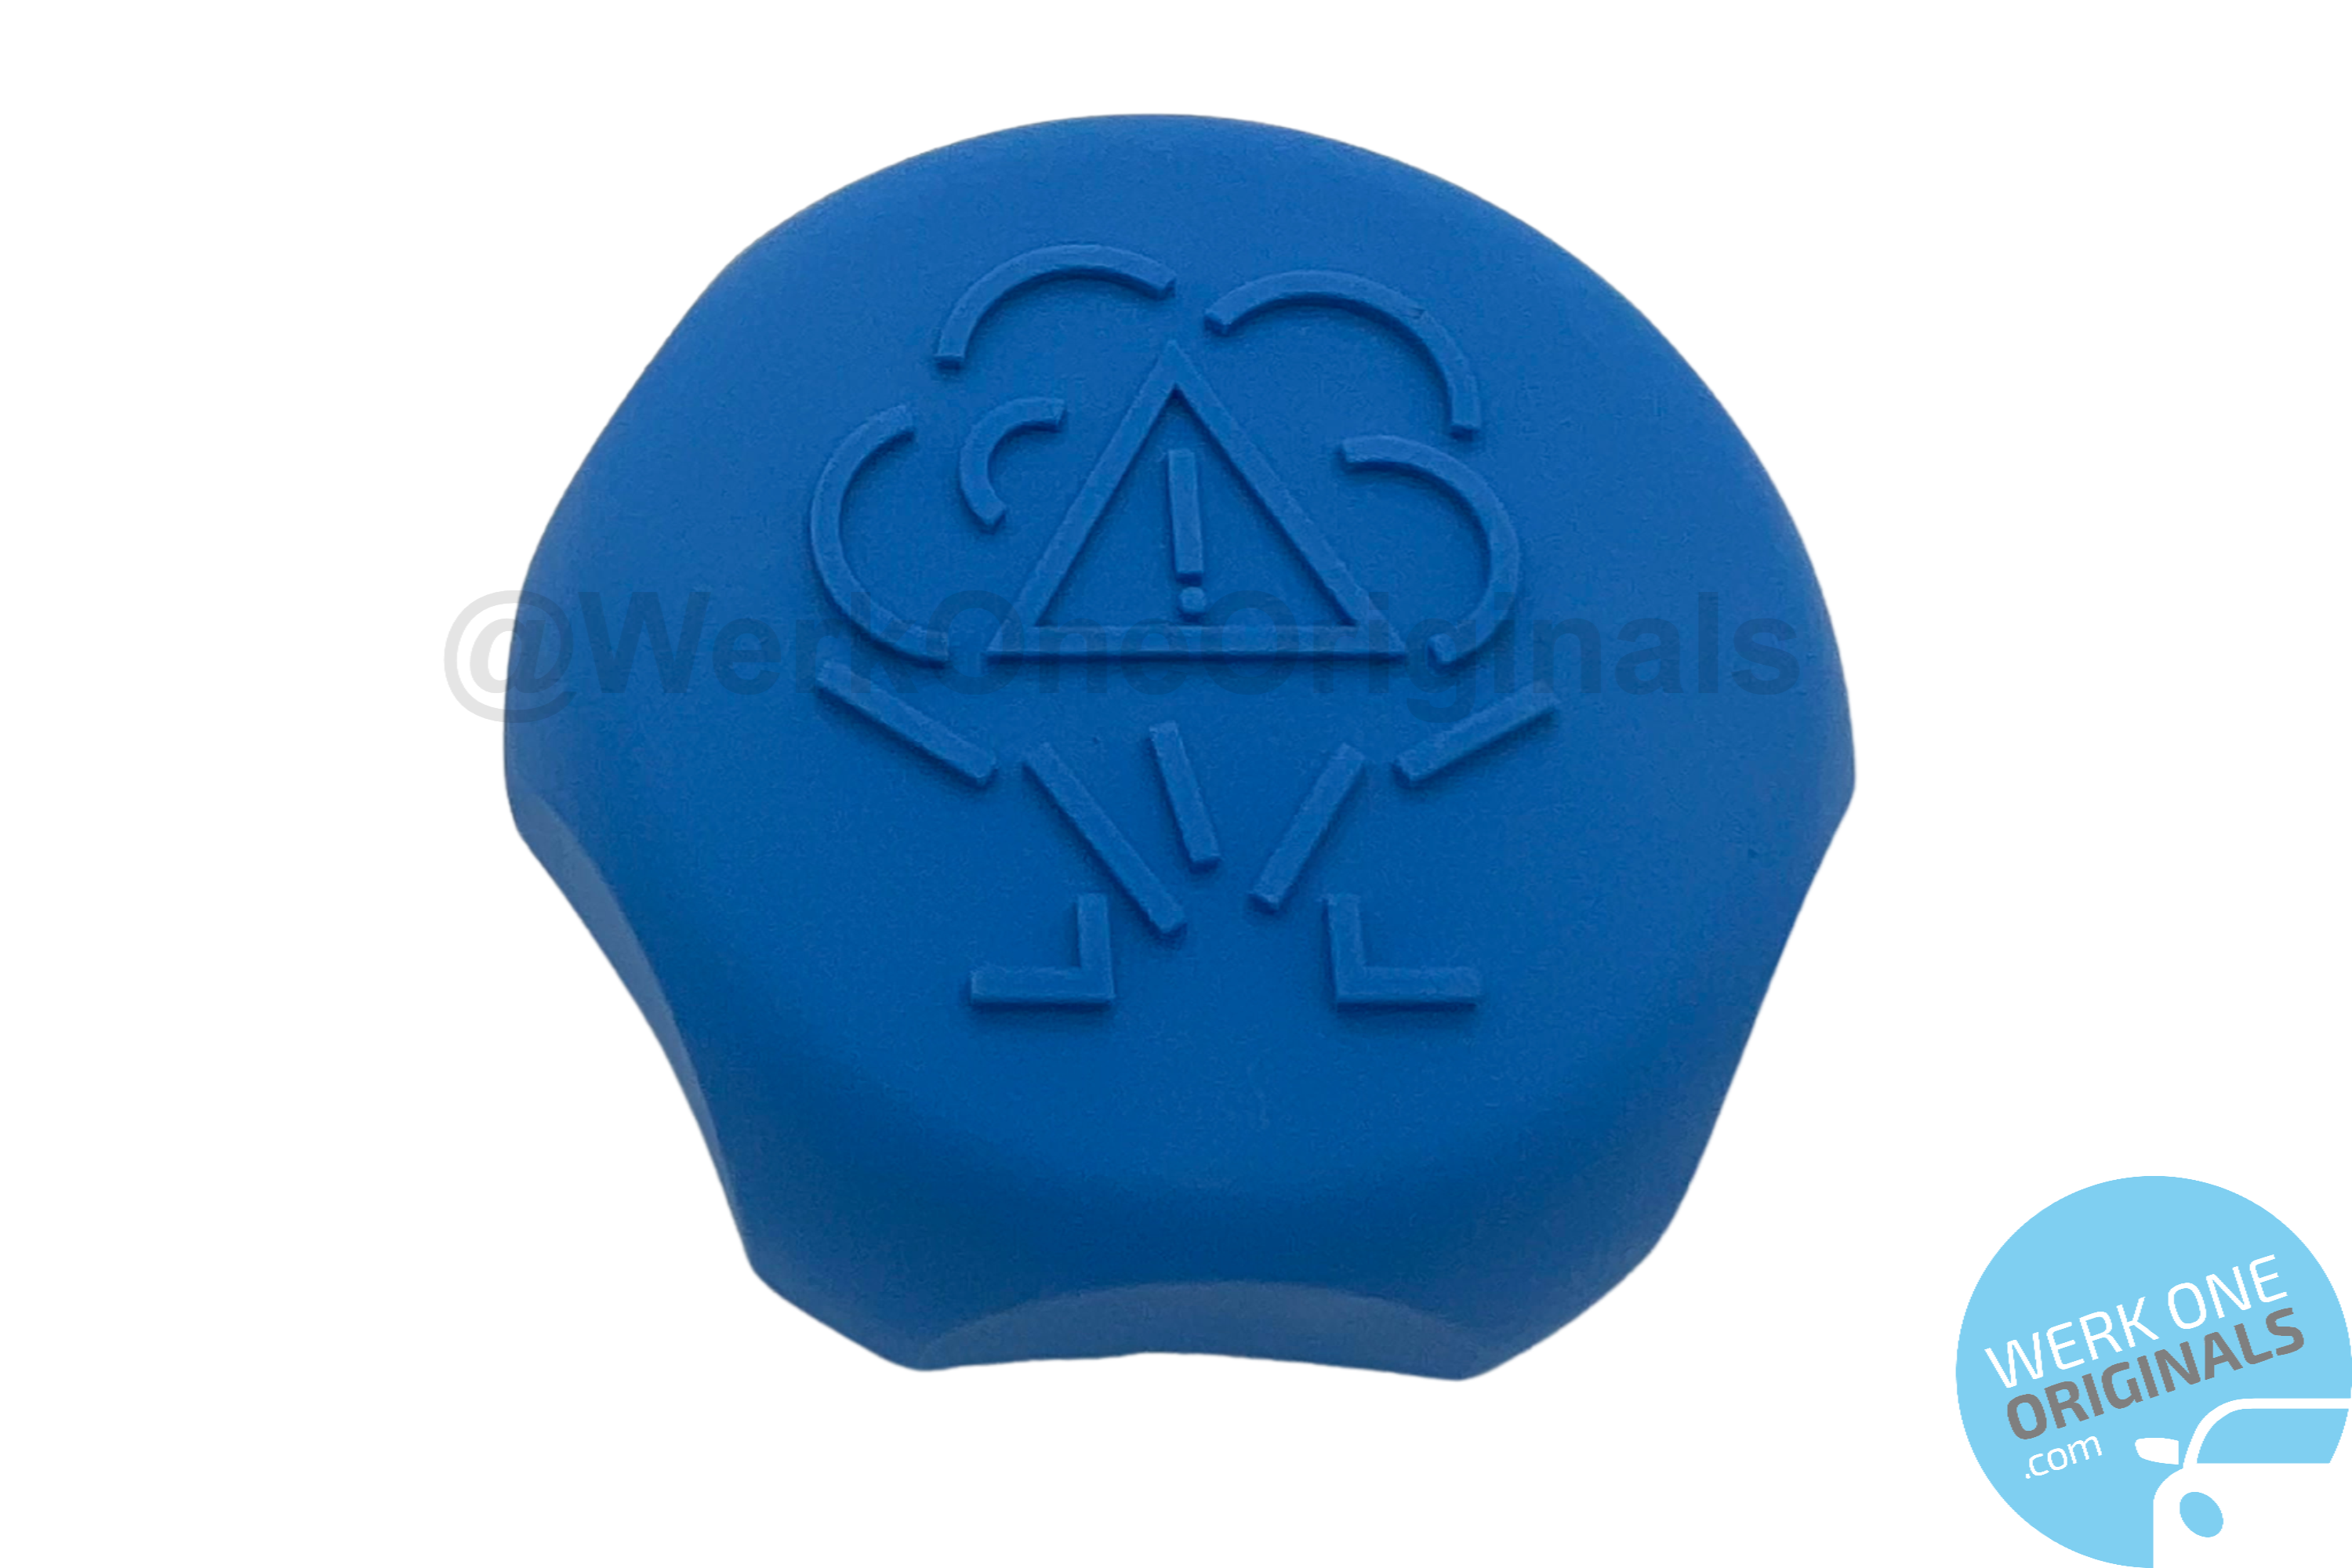 Porsche Official Water Coolant Cap for Boxster Type 987 Models